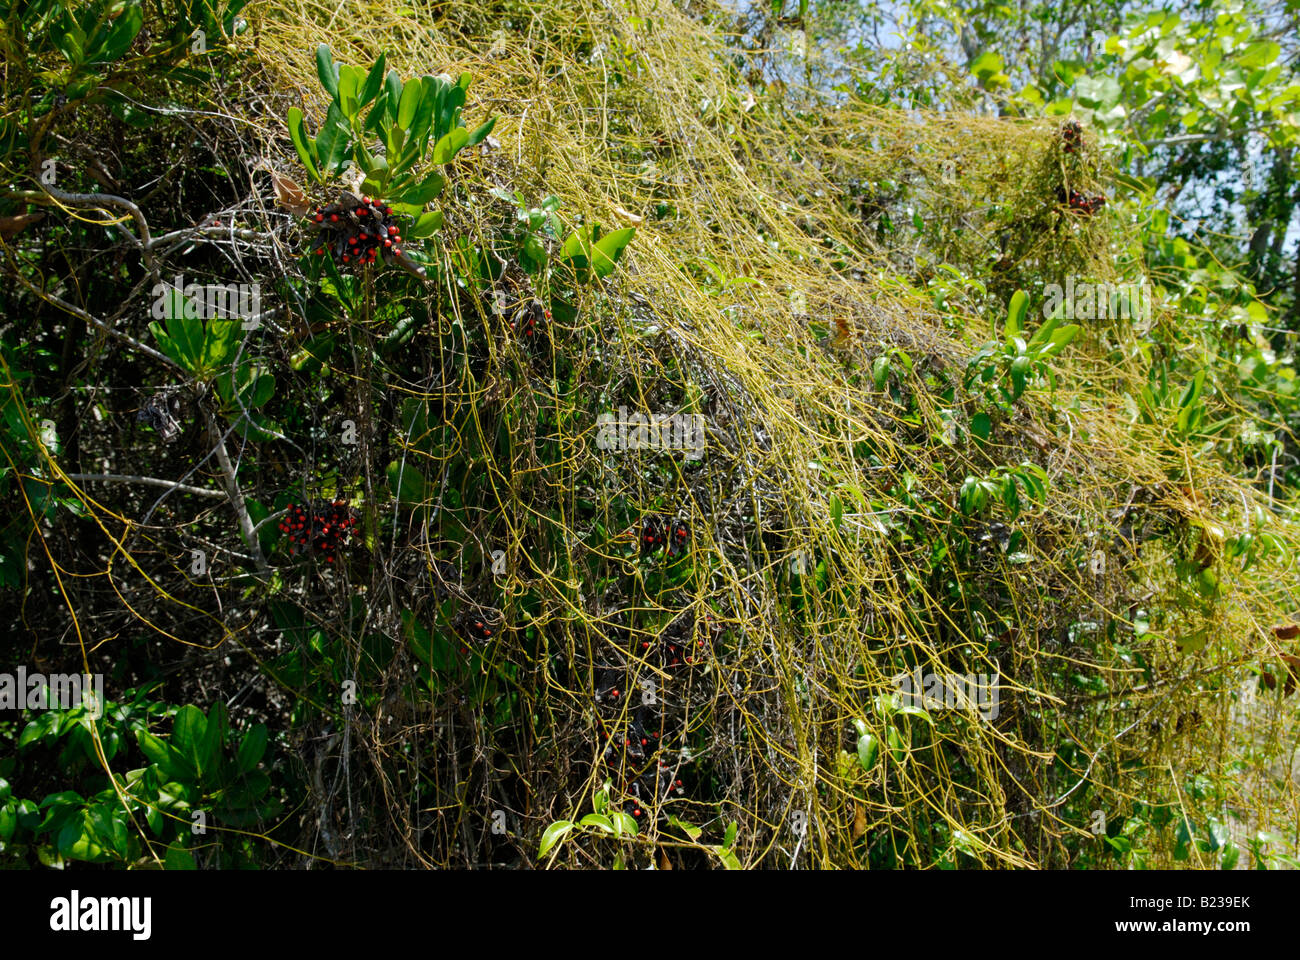 Dodder vine also known as love vine Cuscuta sp smothering a host plant Stock Photo